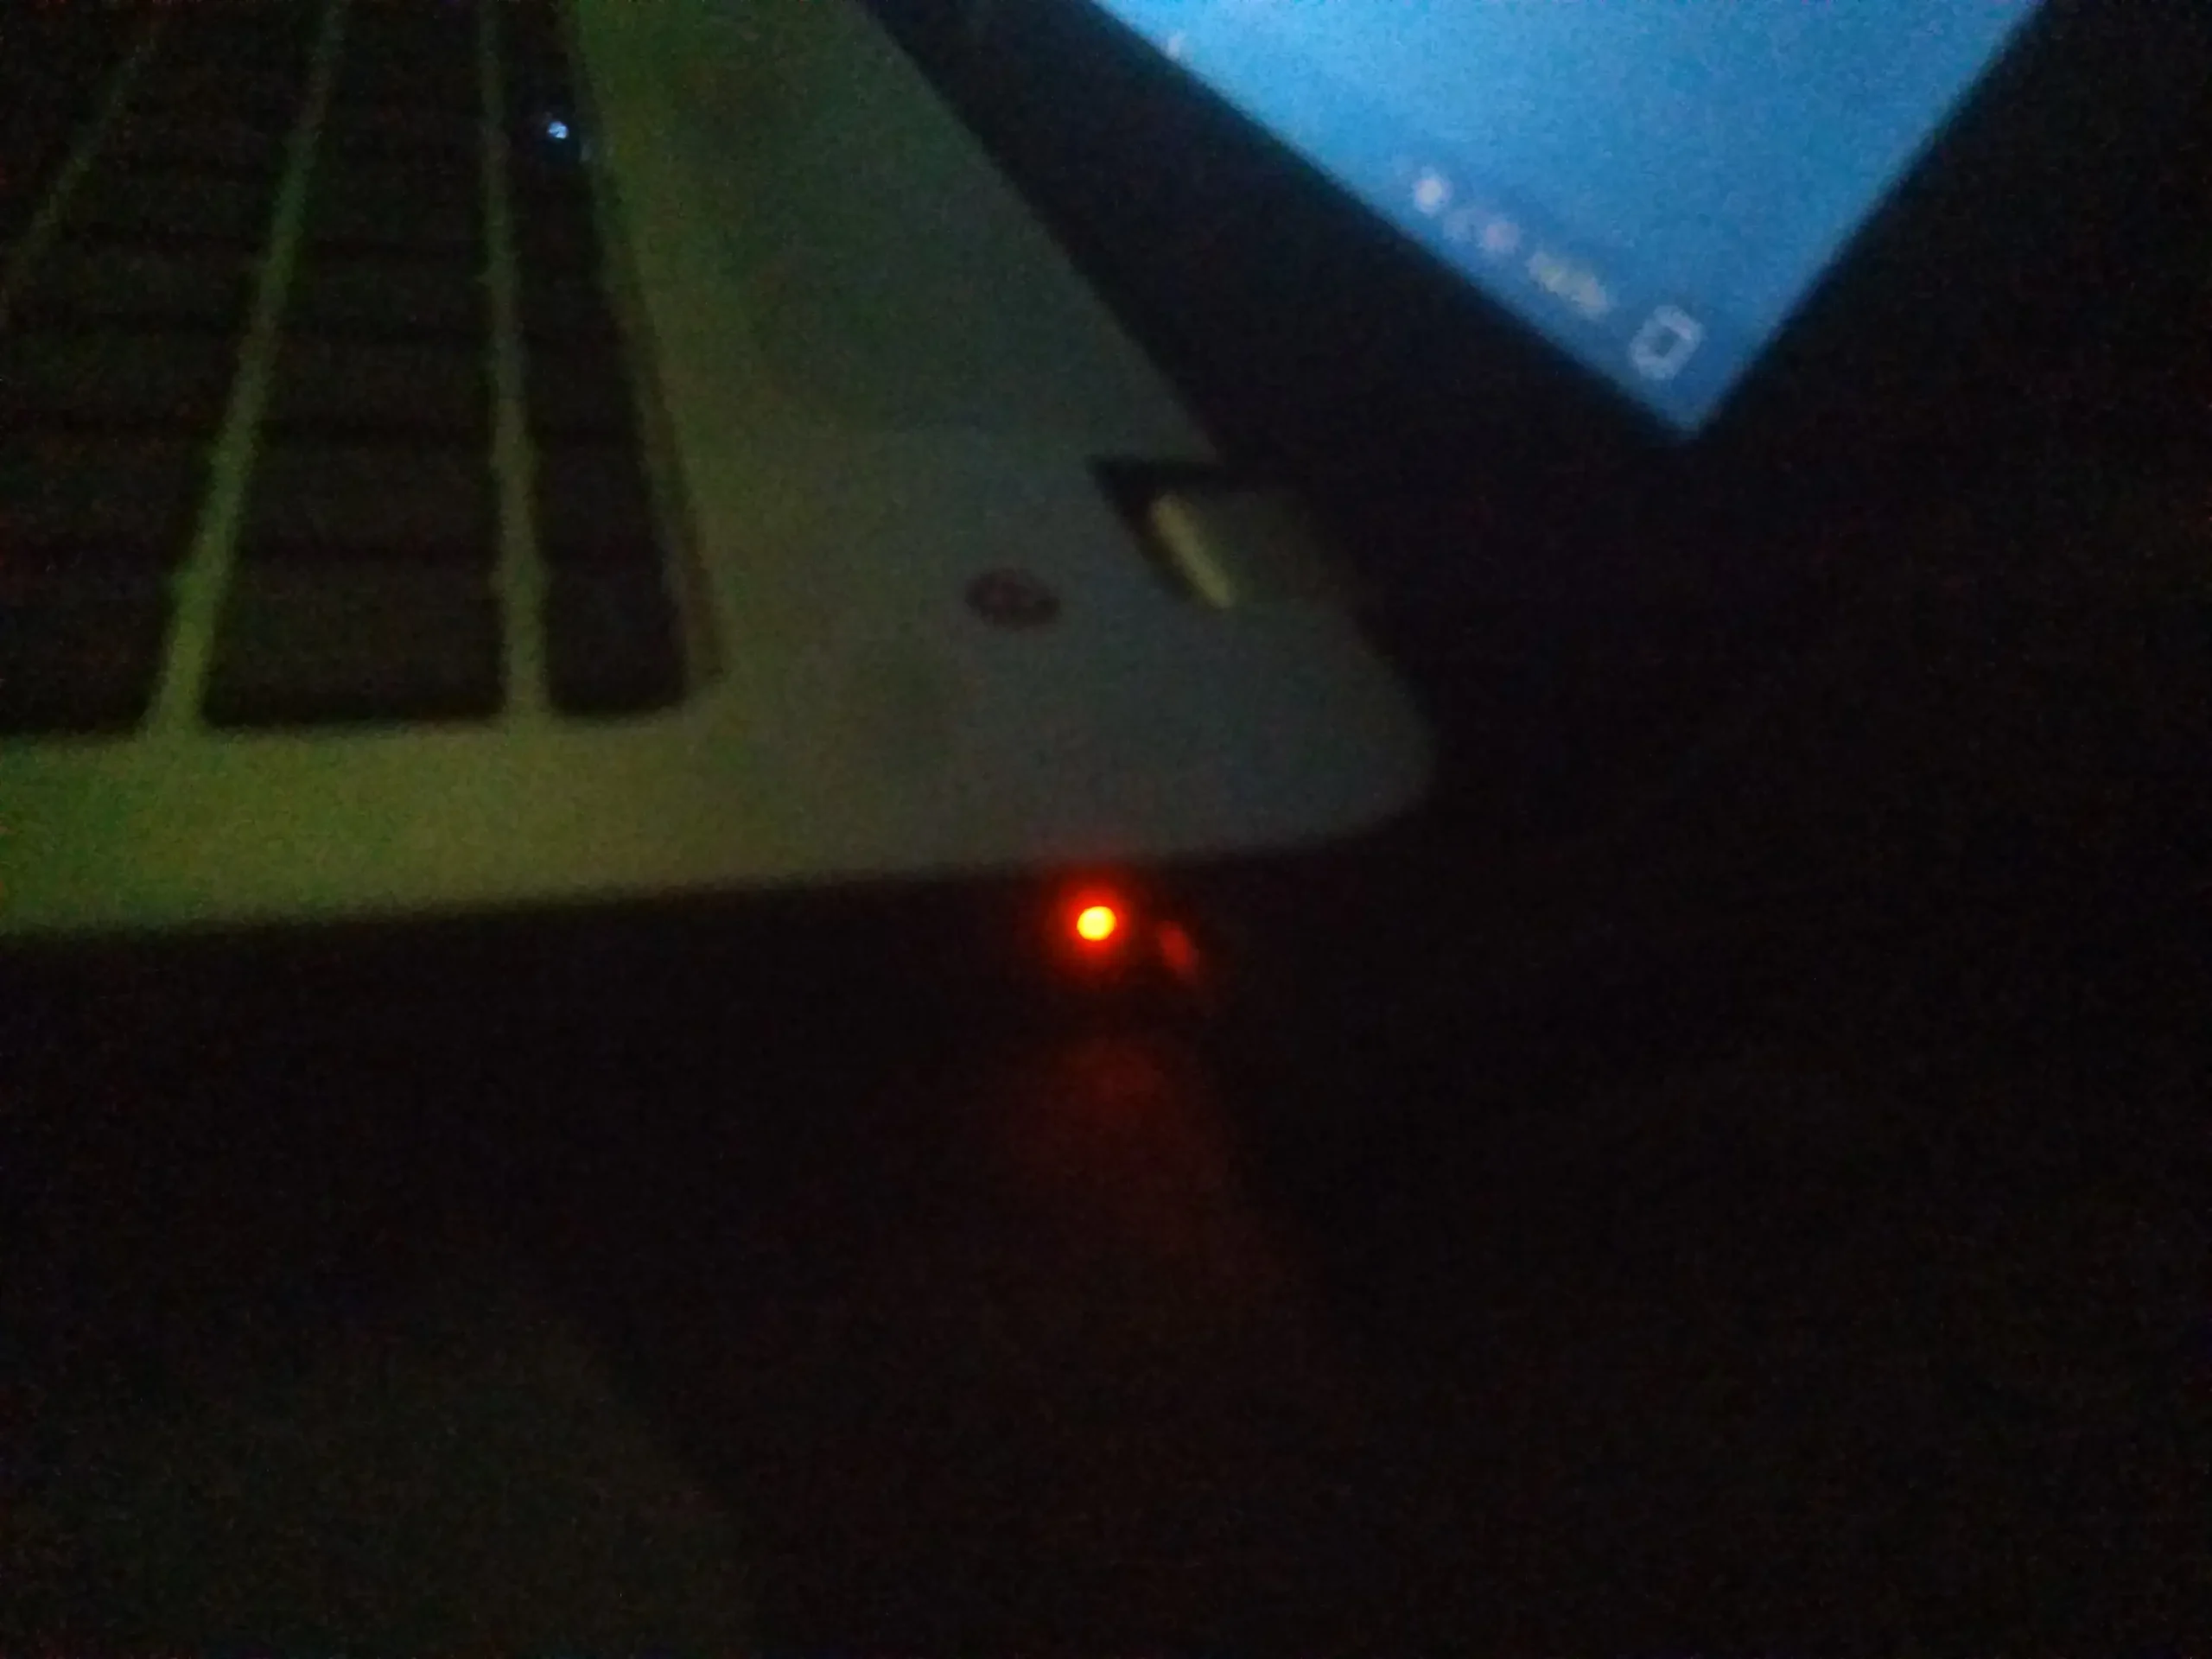 hewlett packard laptop light flashing - What does it mean when the power button on your laptop is blinking